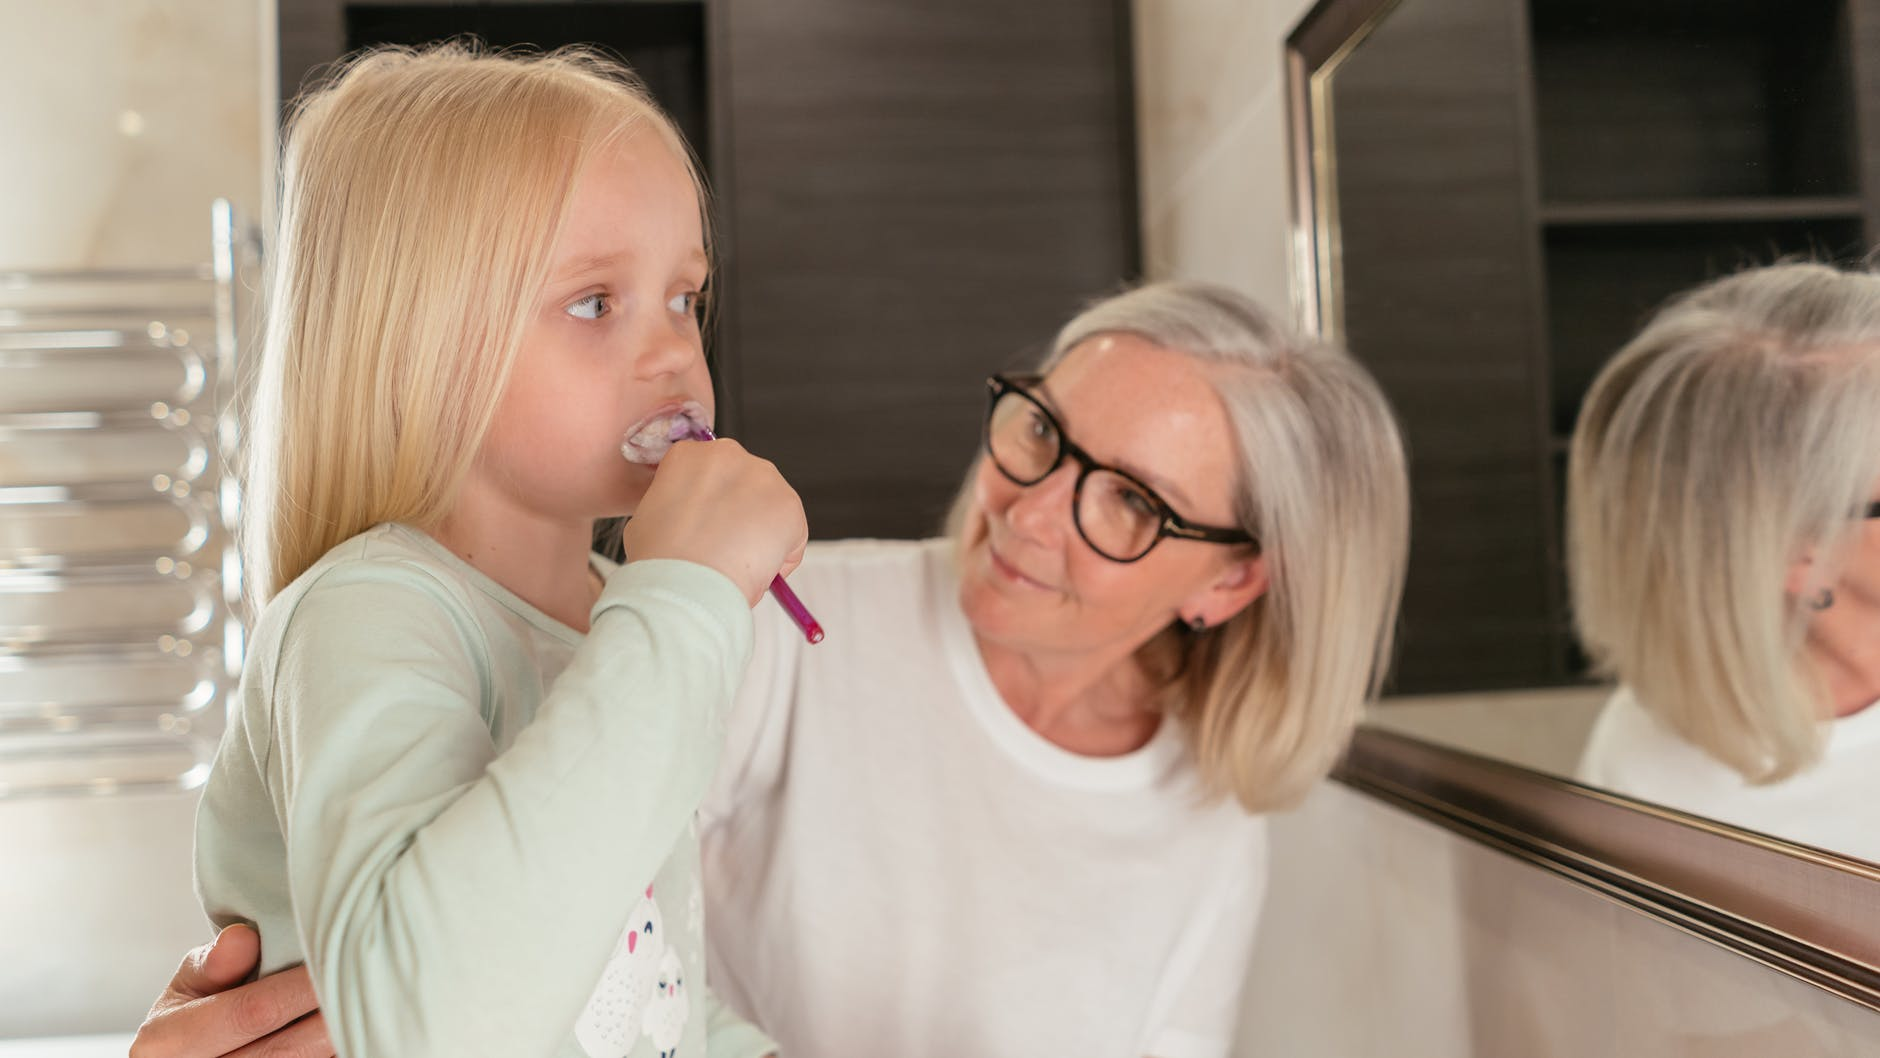 A woman teaching her daughter how to brush her teeth